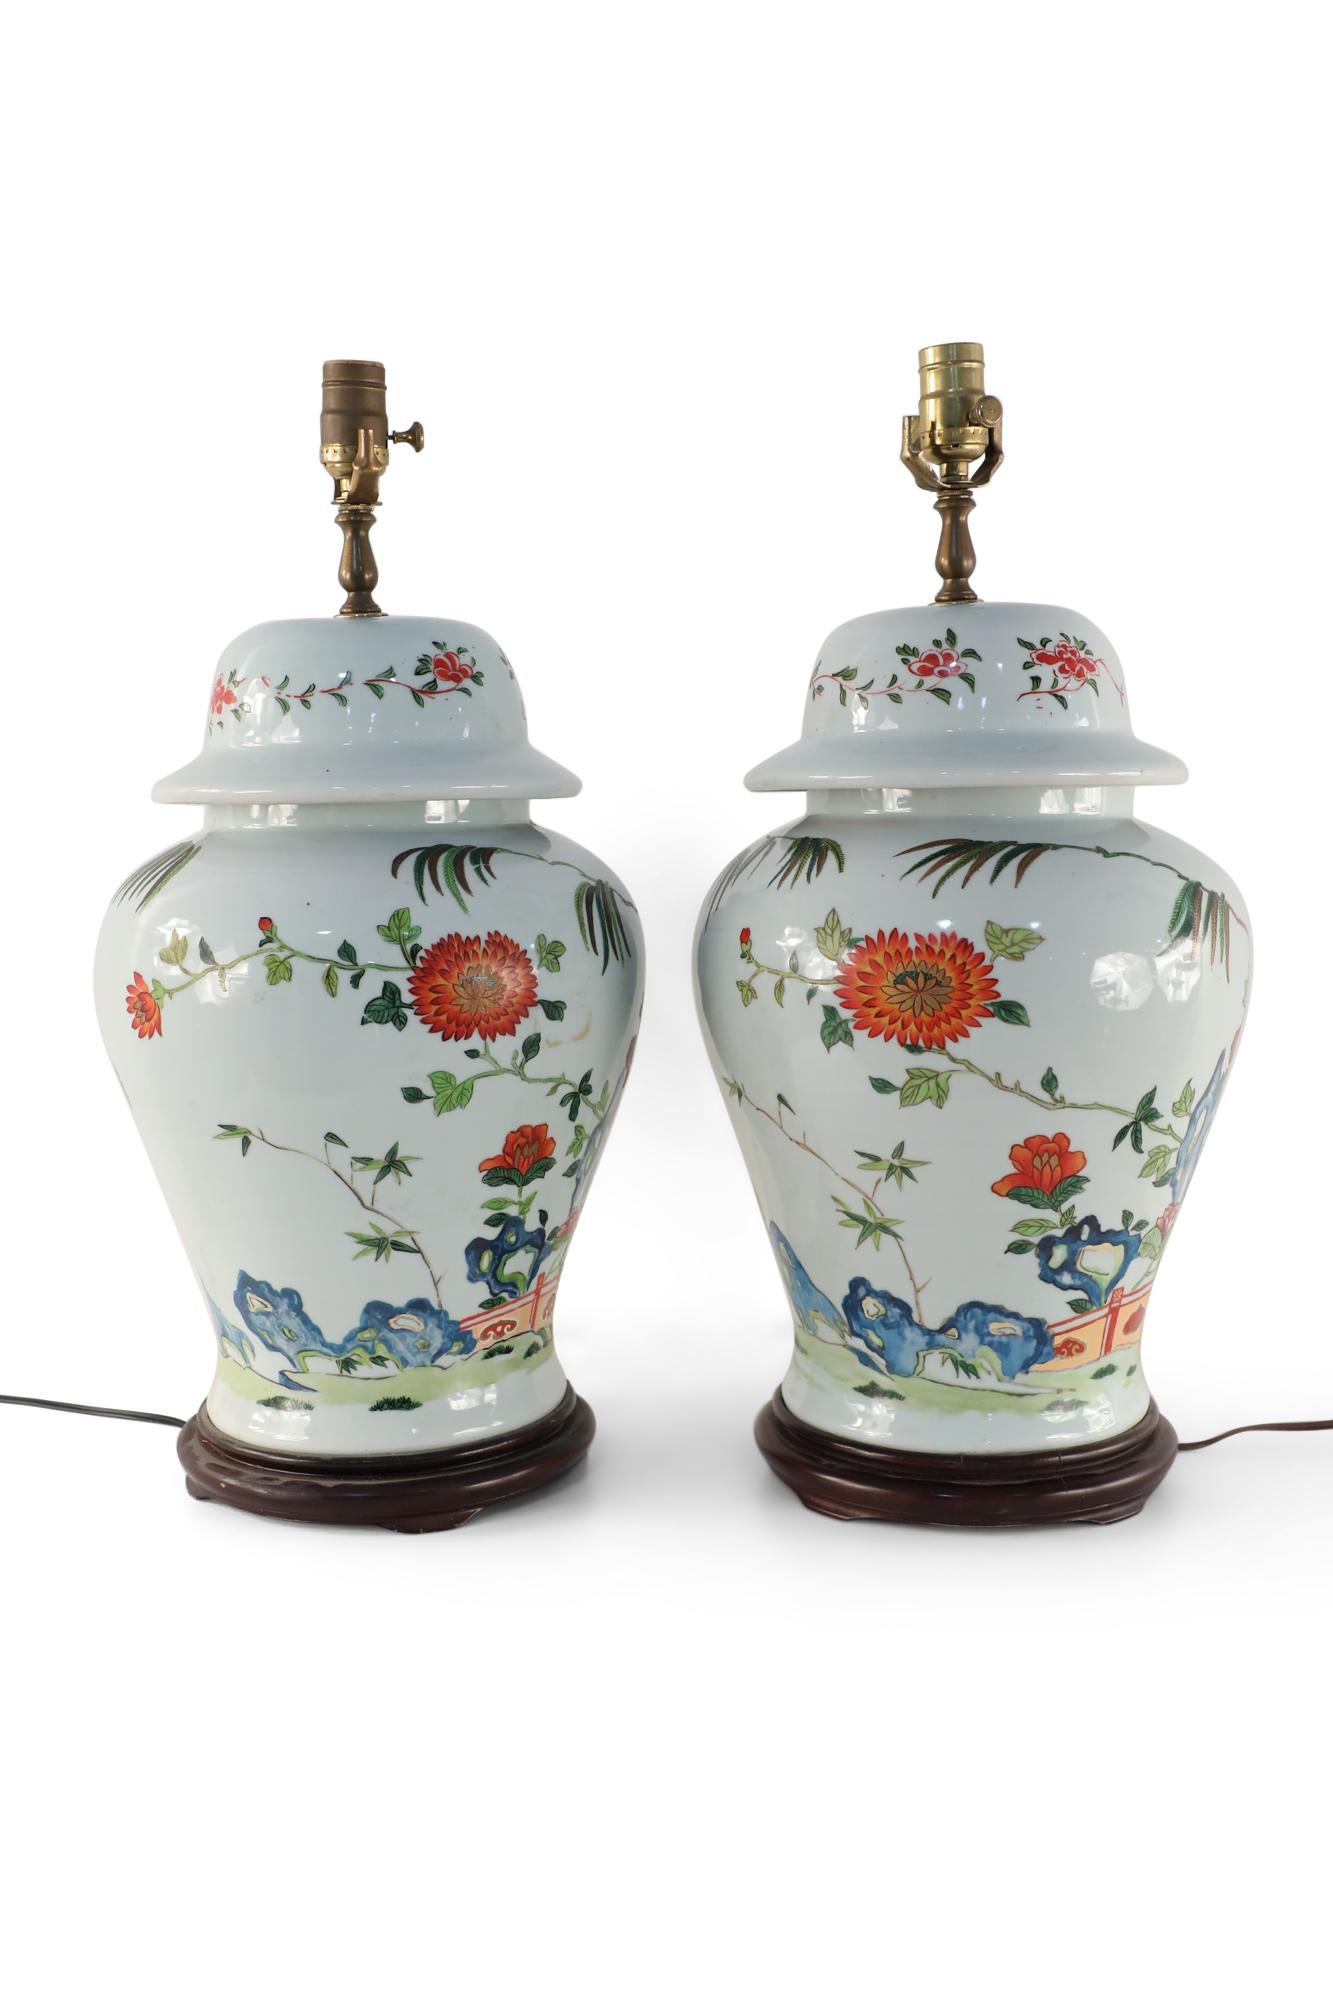 20th Century Pair of Chinese Off-White Floral Porcelain Urn Table Lamps Mounted on Wood Base For Sale